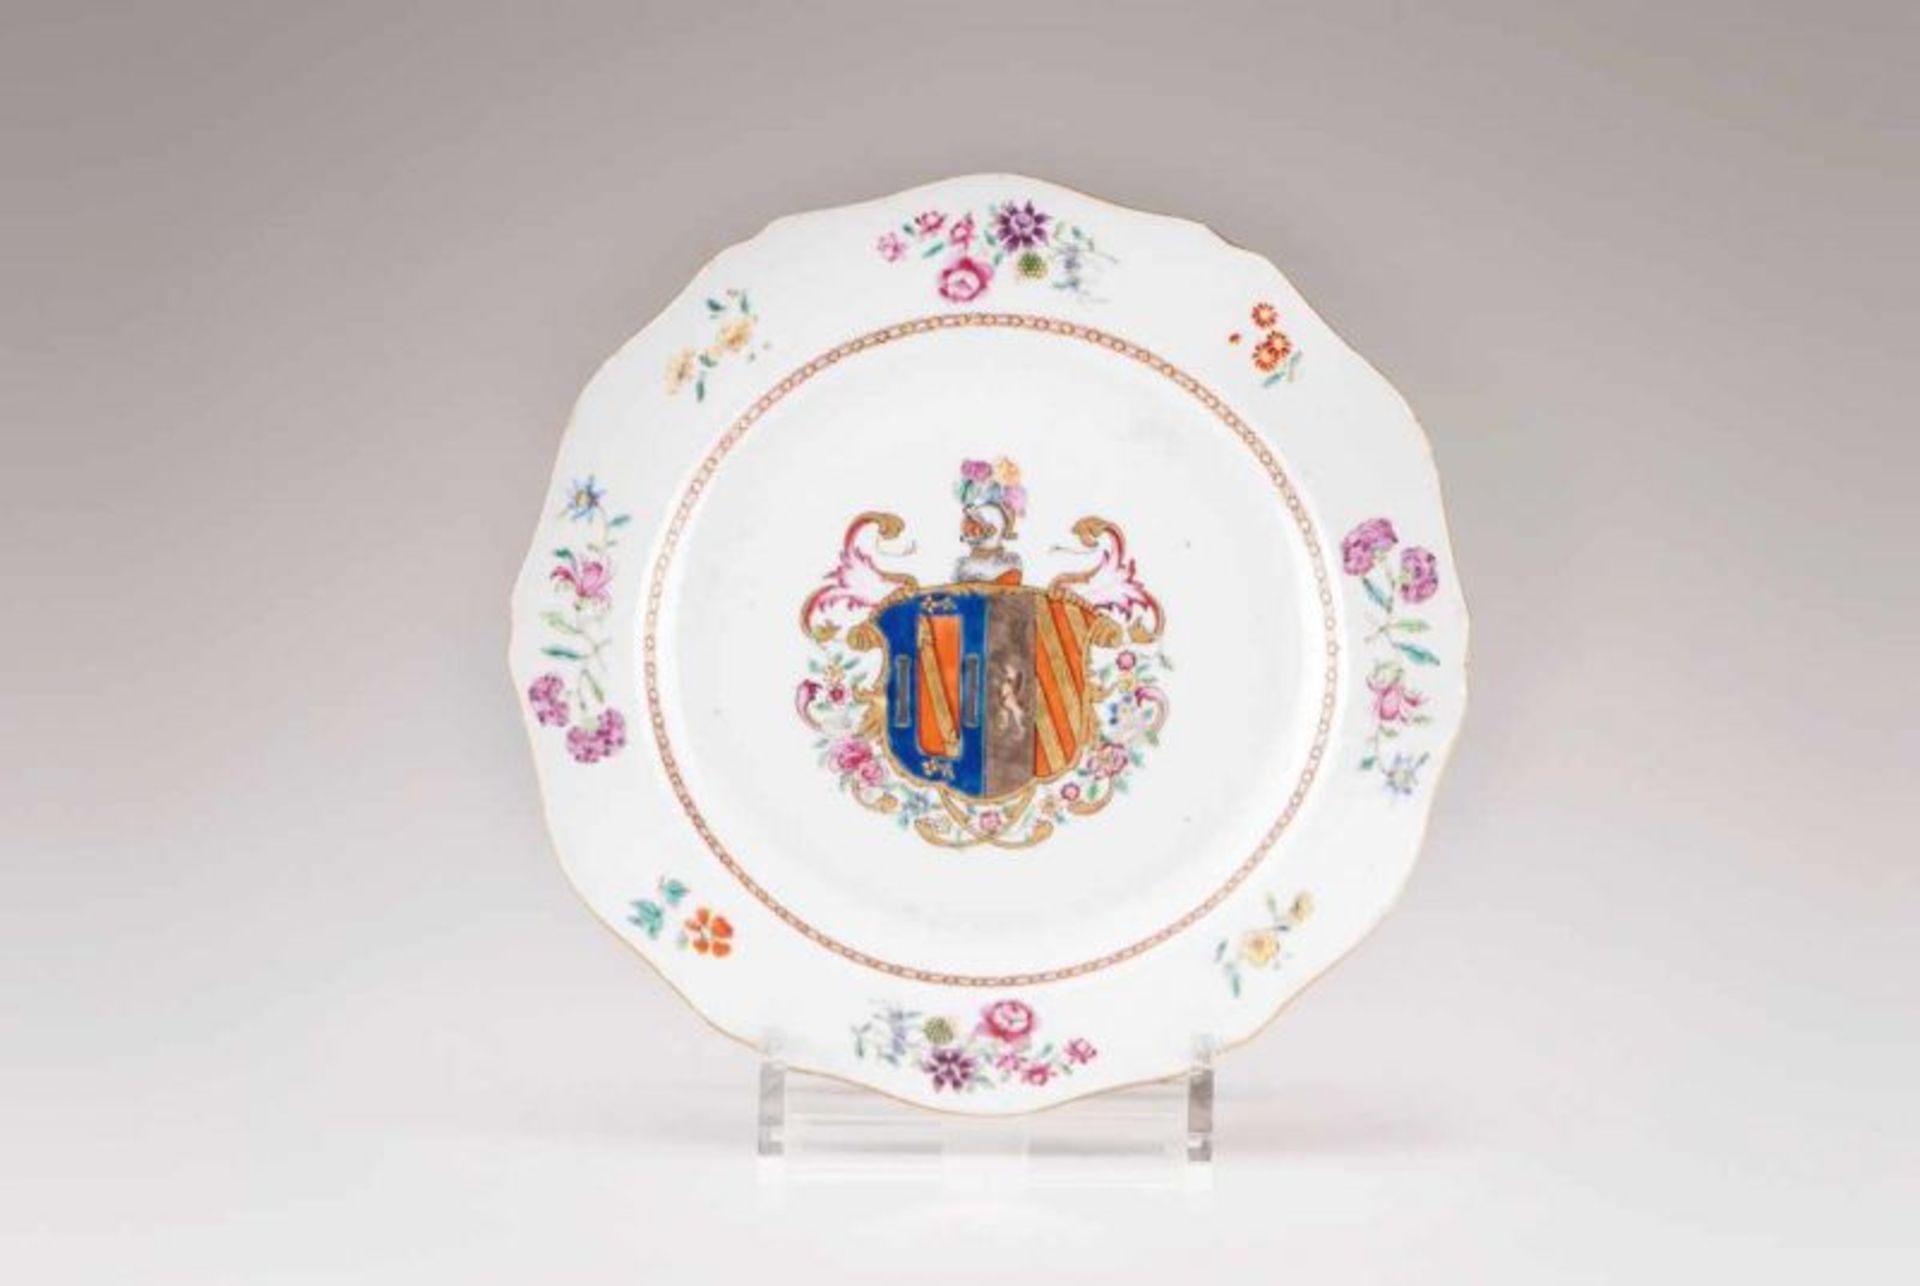 A scalloped plate Chinese export porcelain Polychrome Famille Rose decoration bearing coat-of-arms,